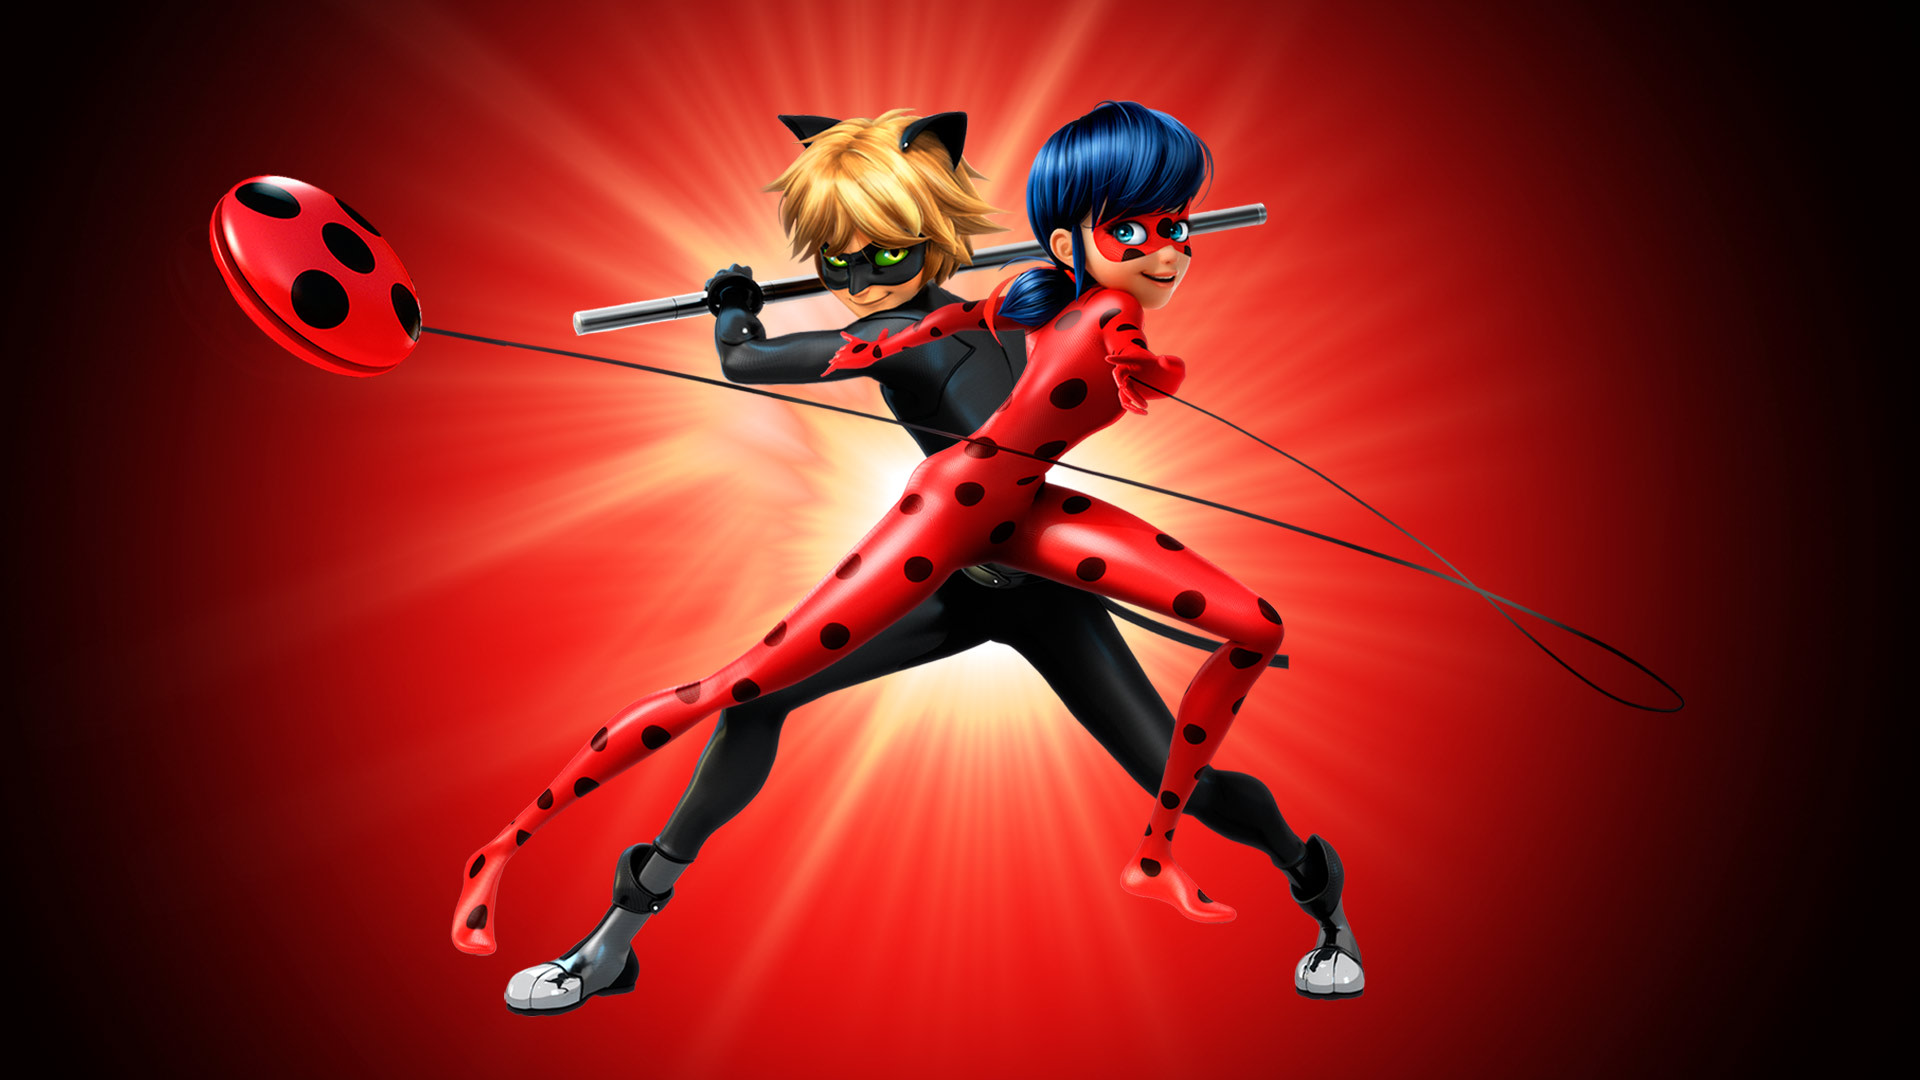 Miraculous Ladybug & Cat Noir - Download & Play for Free Here